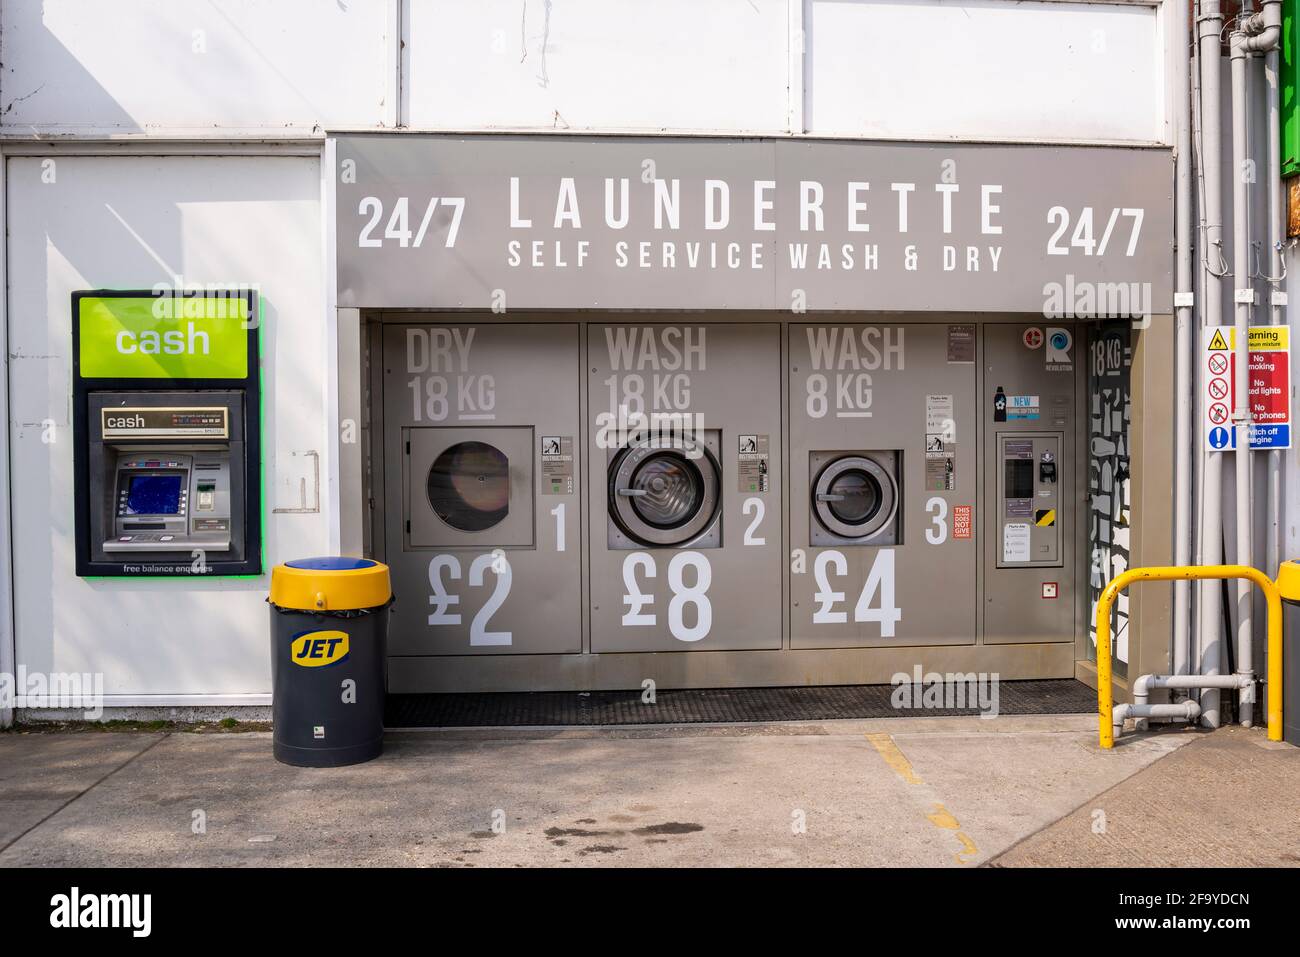 Self service 24/7 laundrette at a service station in Hawkwell, Essex, UK. Automatic, automated clothes washing machines, outside, on garage forecourt Stock Photo